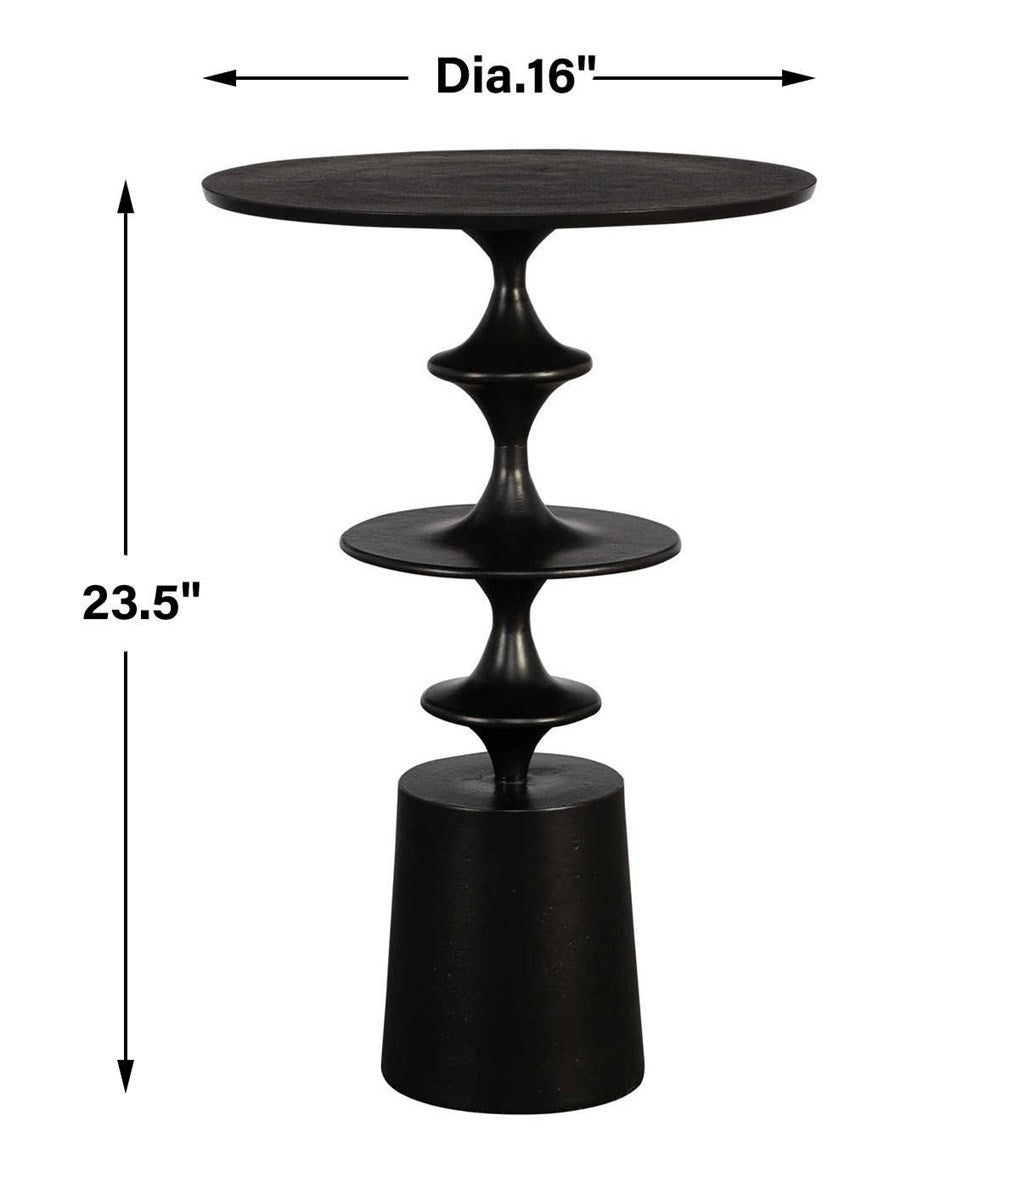 Curvy Forms Accent Table